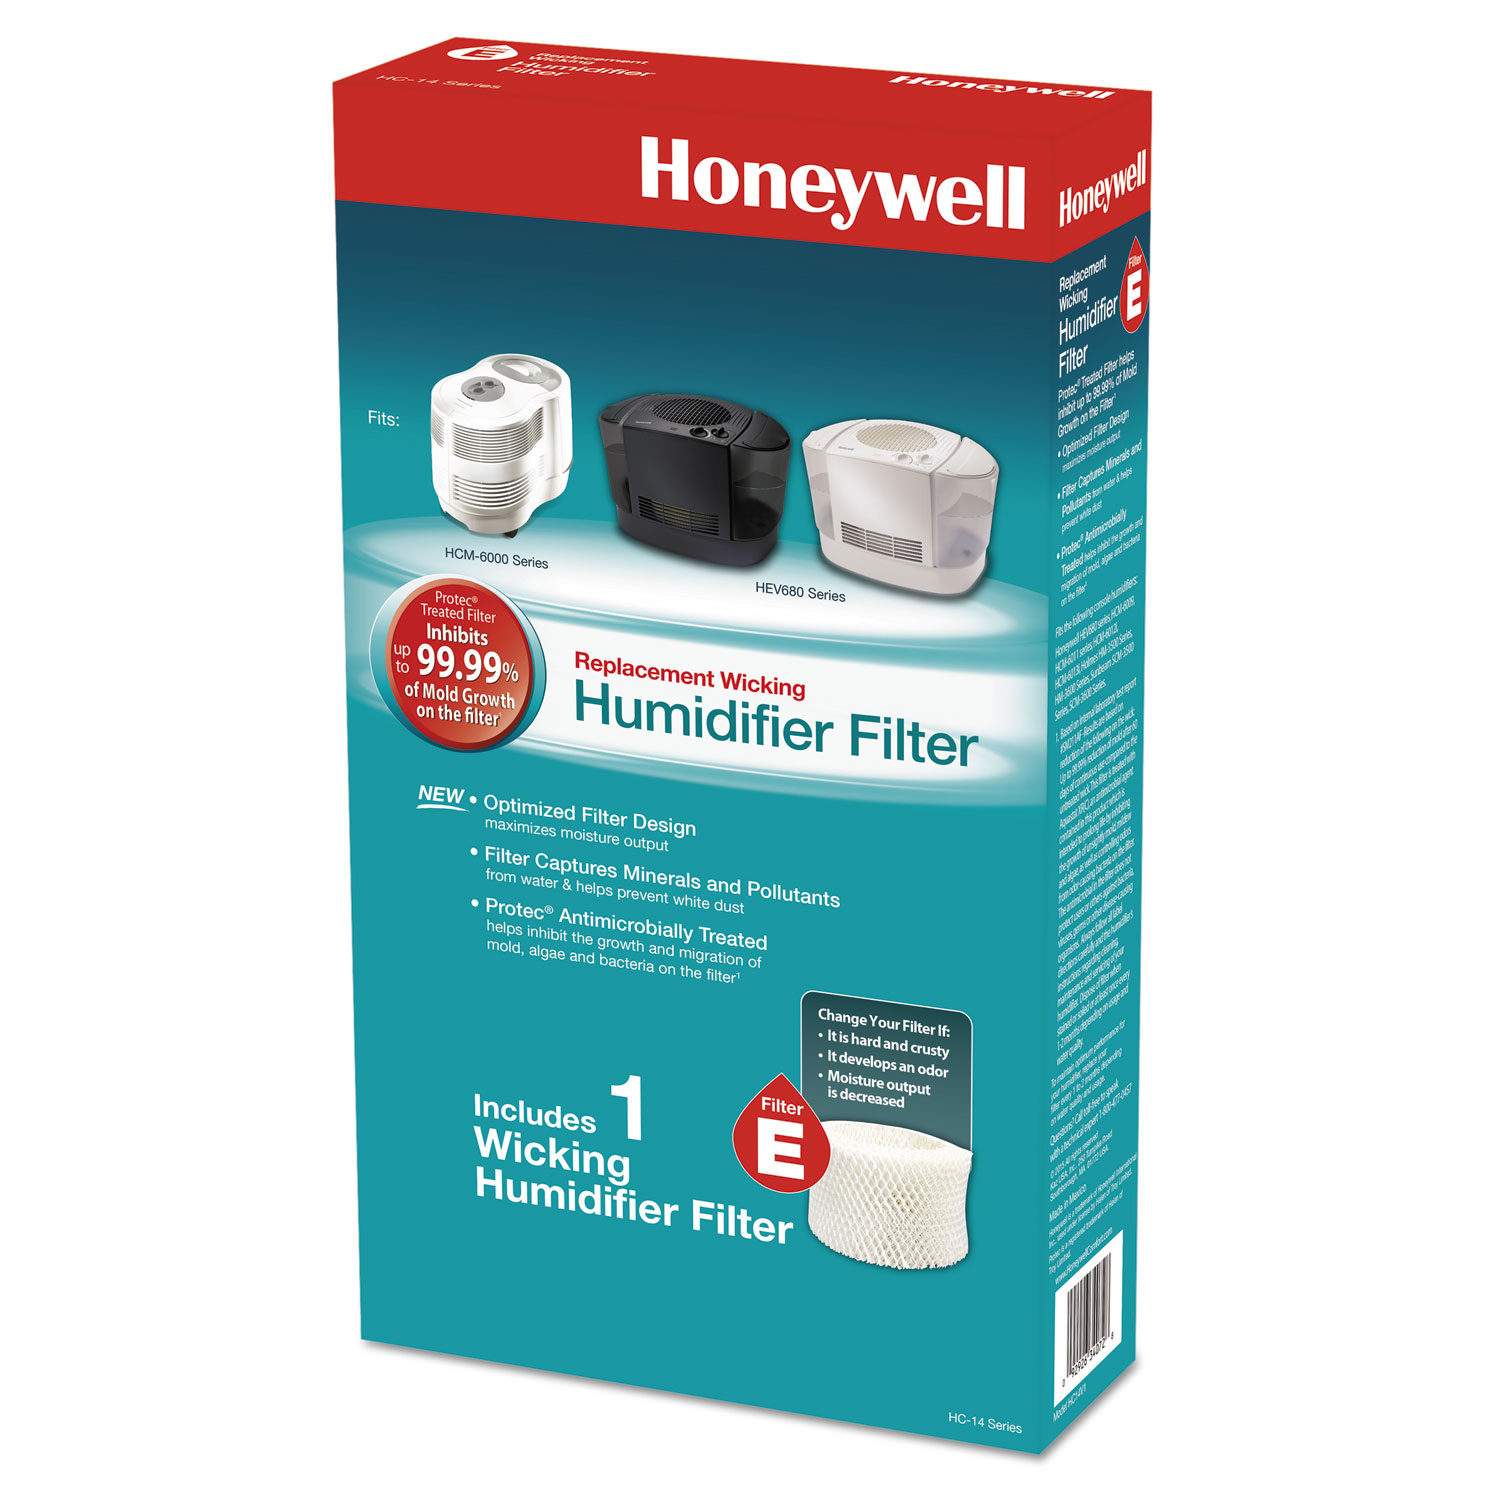  Honeywell HC-14 Quietcare Console Humidifier Replacement Filter (HWLHC14V1) 